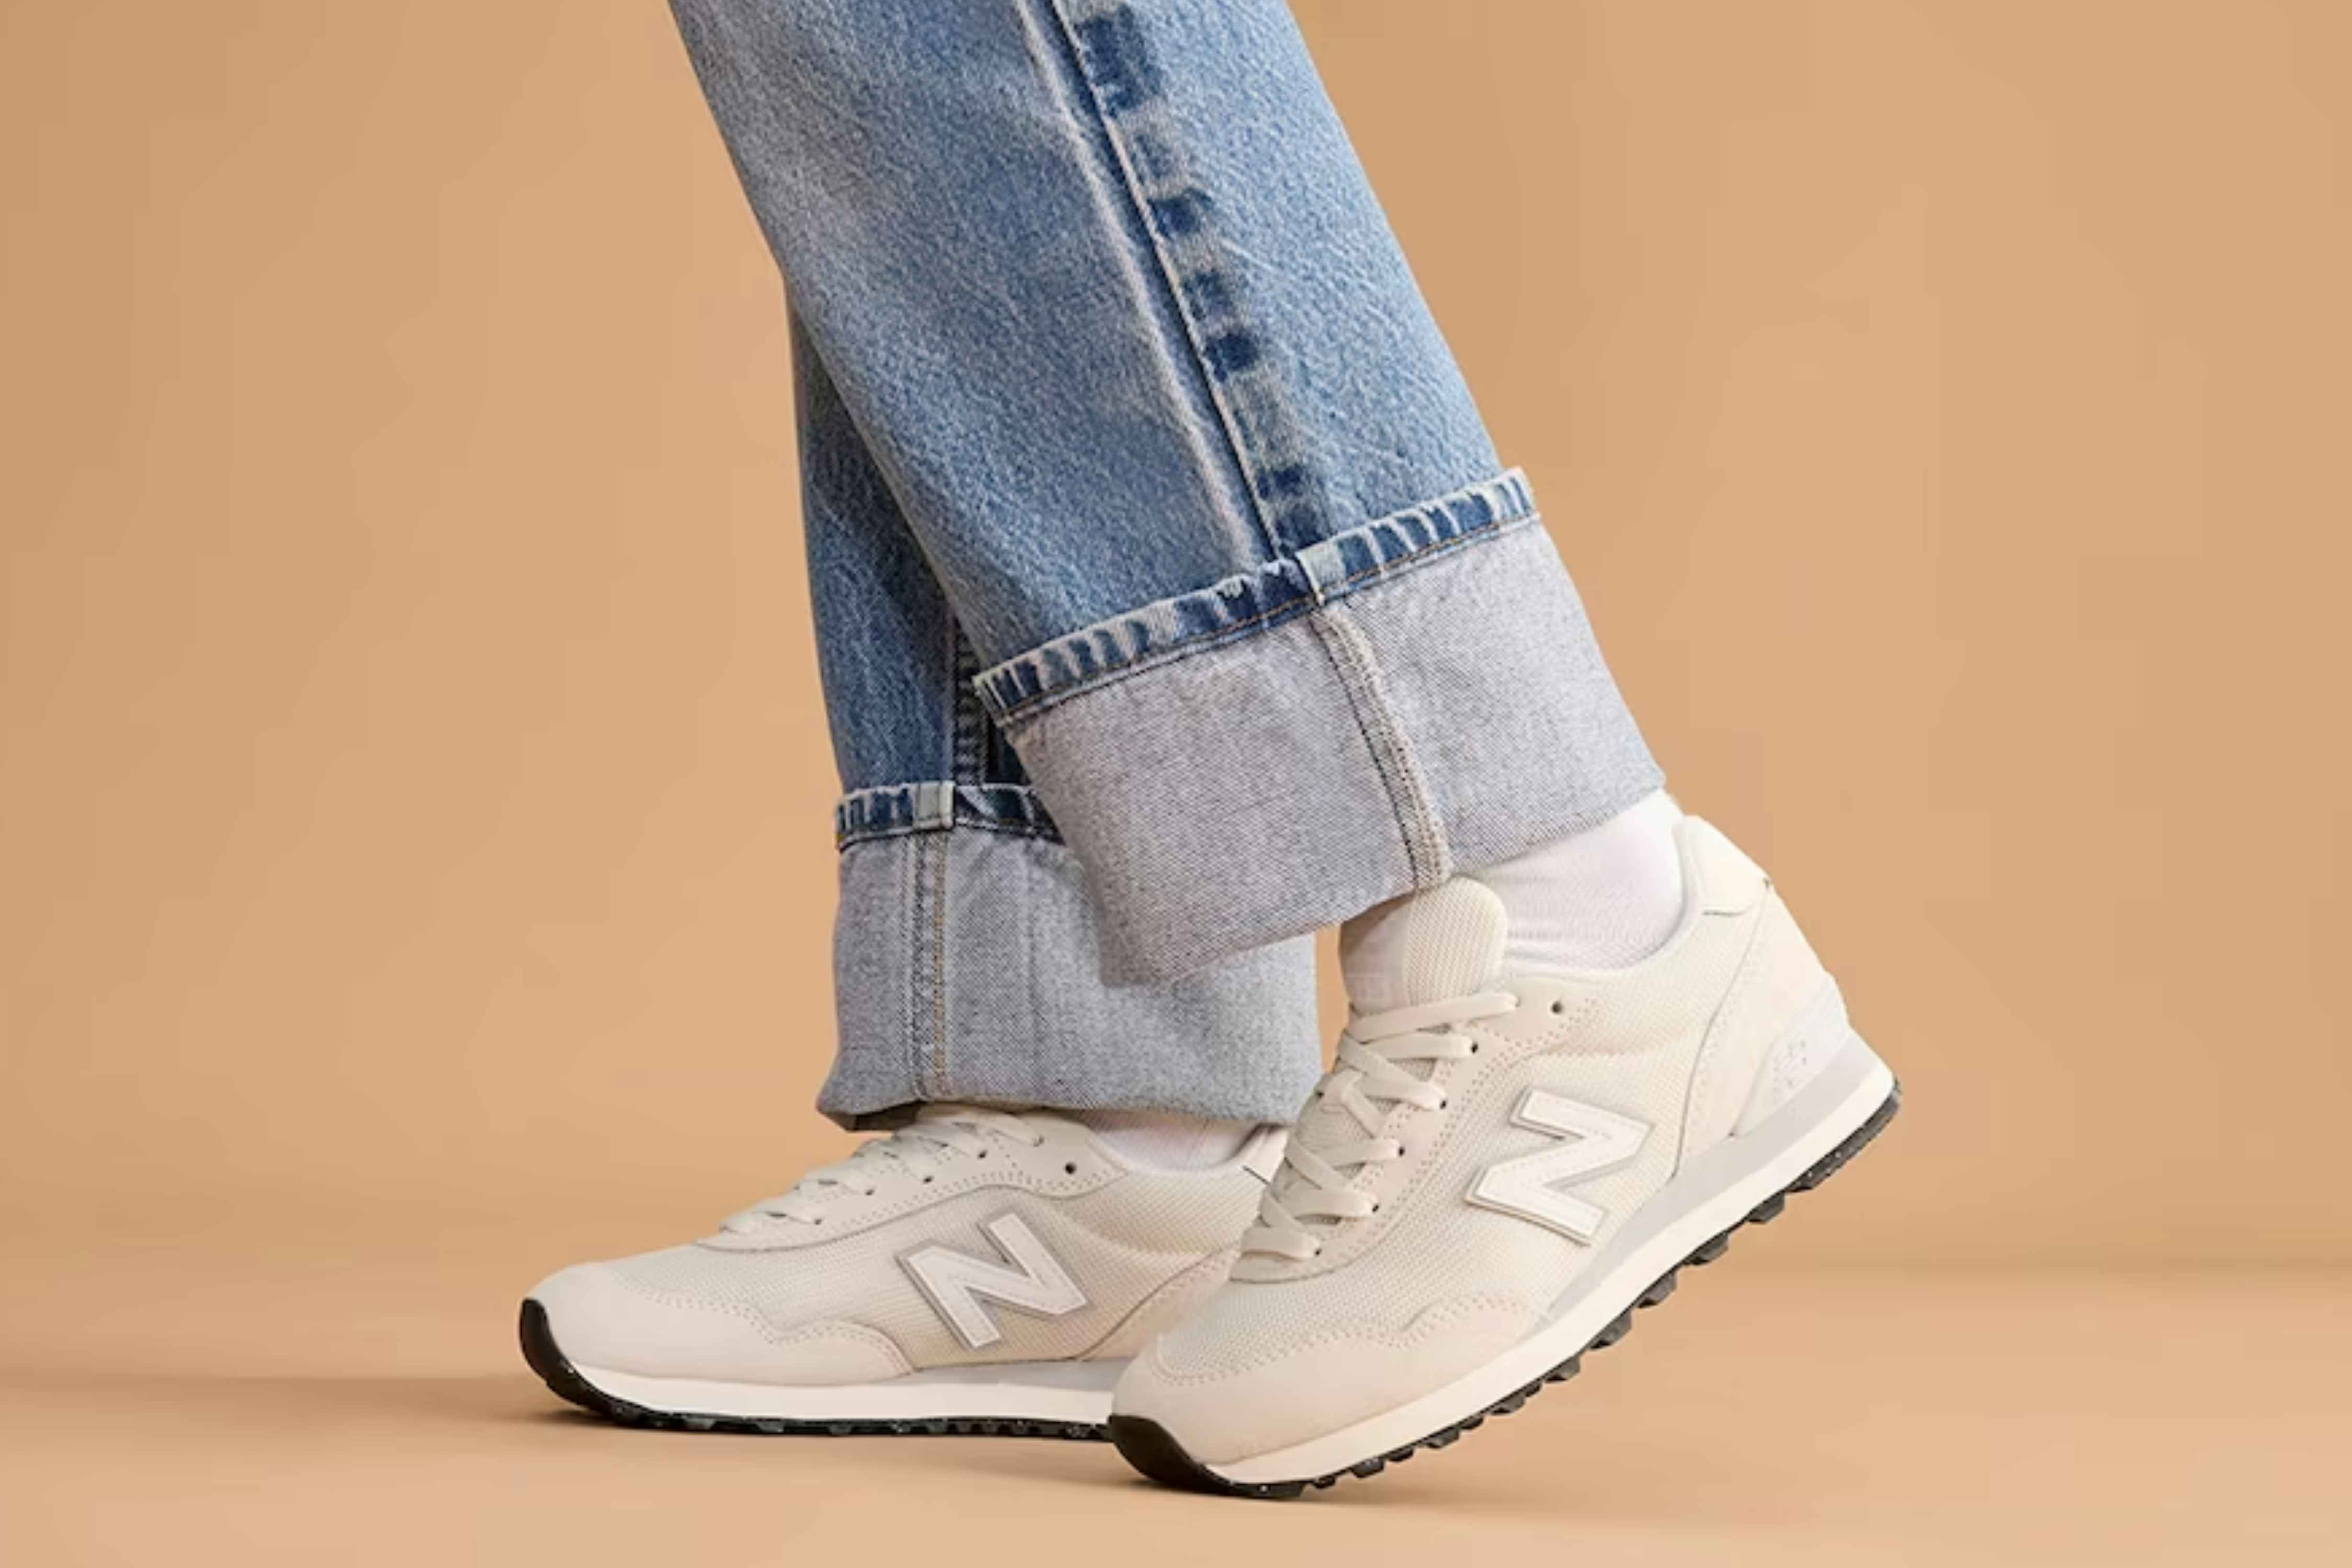 Trending New Balance Women's Classic Sneakers, Only $45 After Kohl's Cash